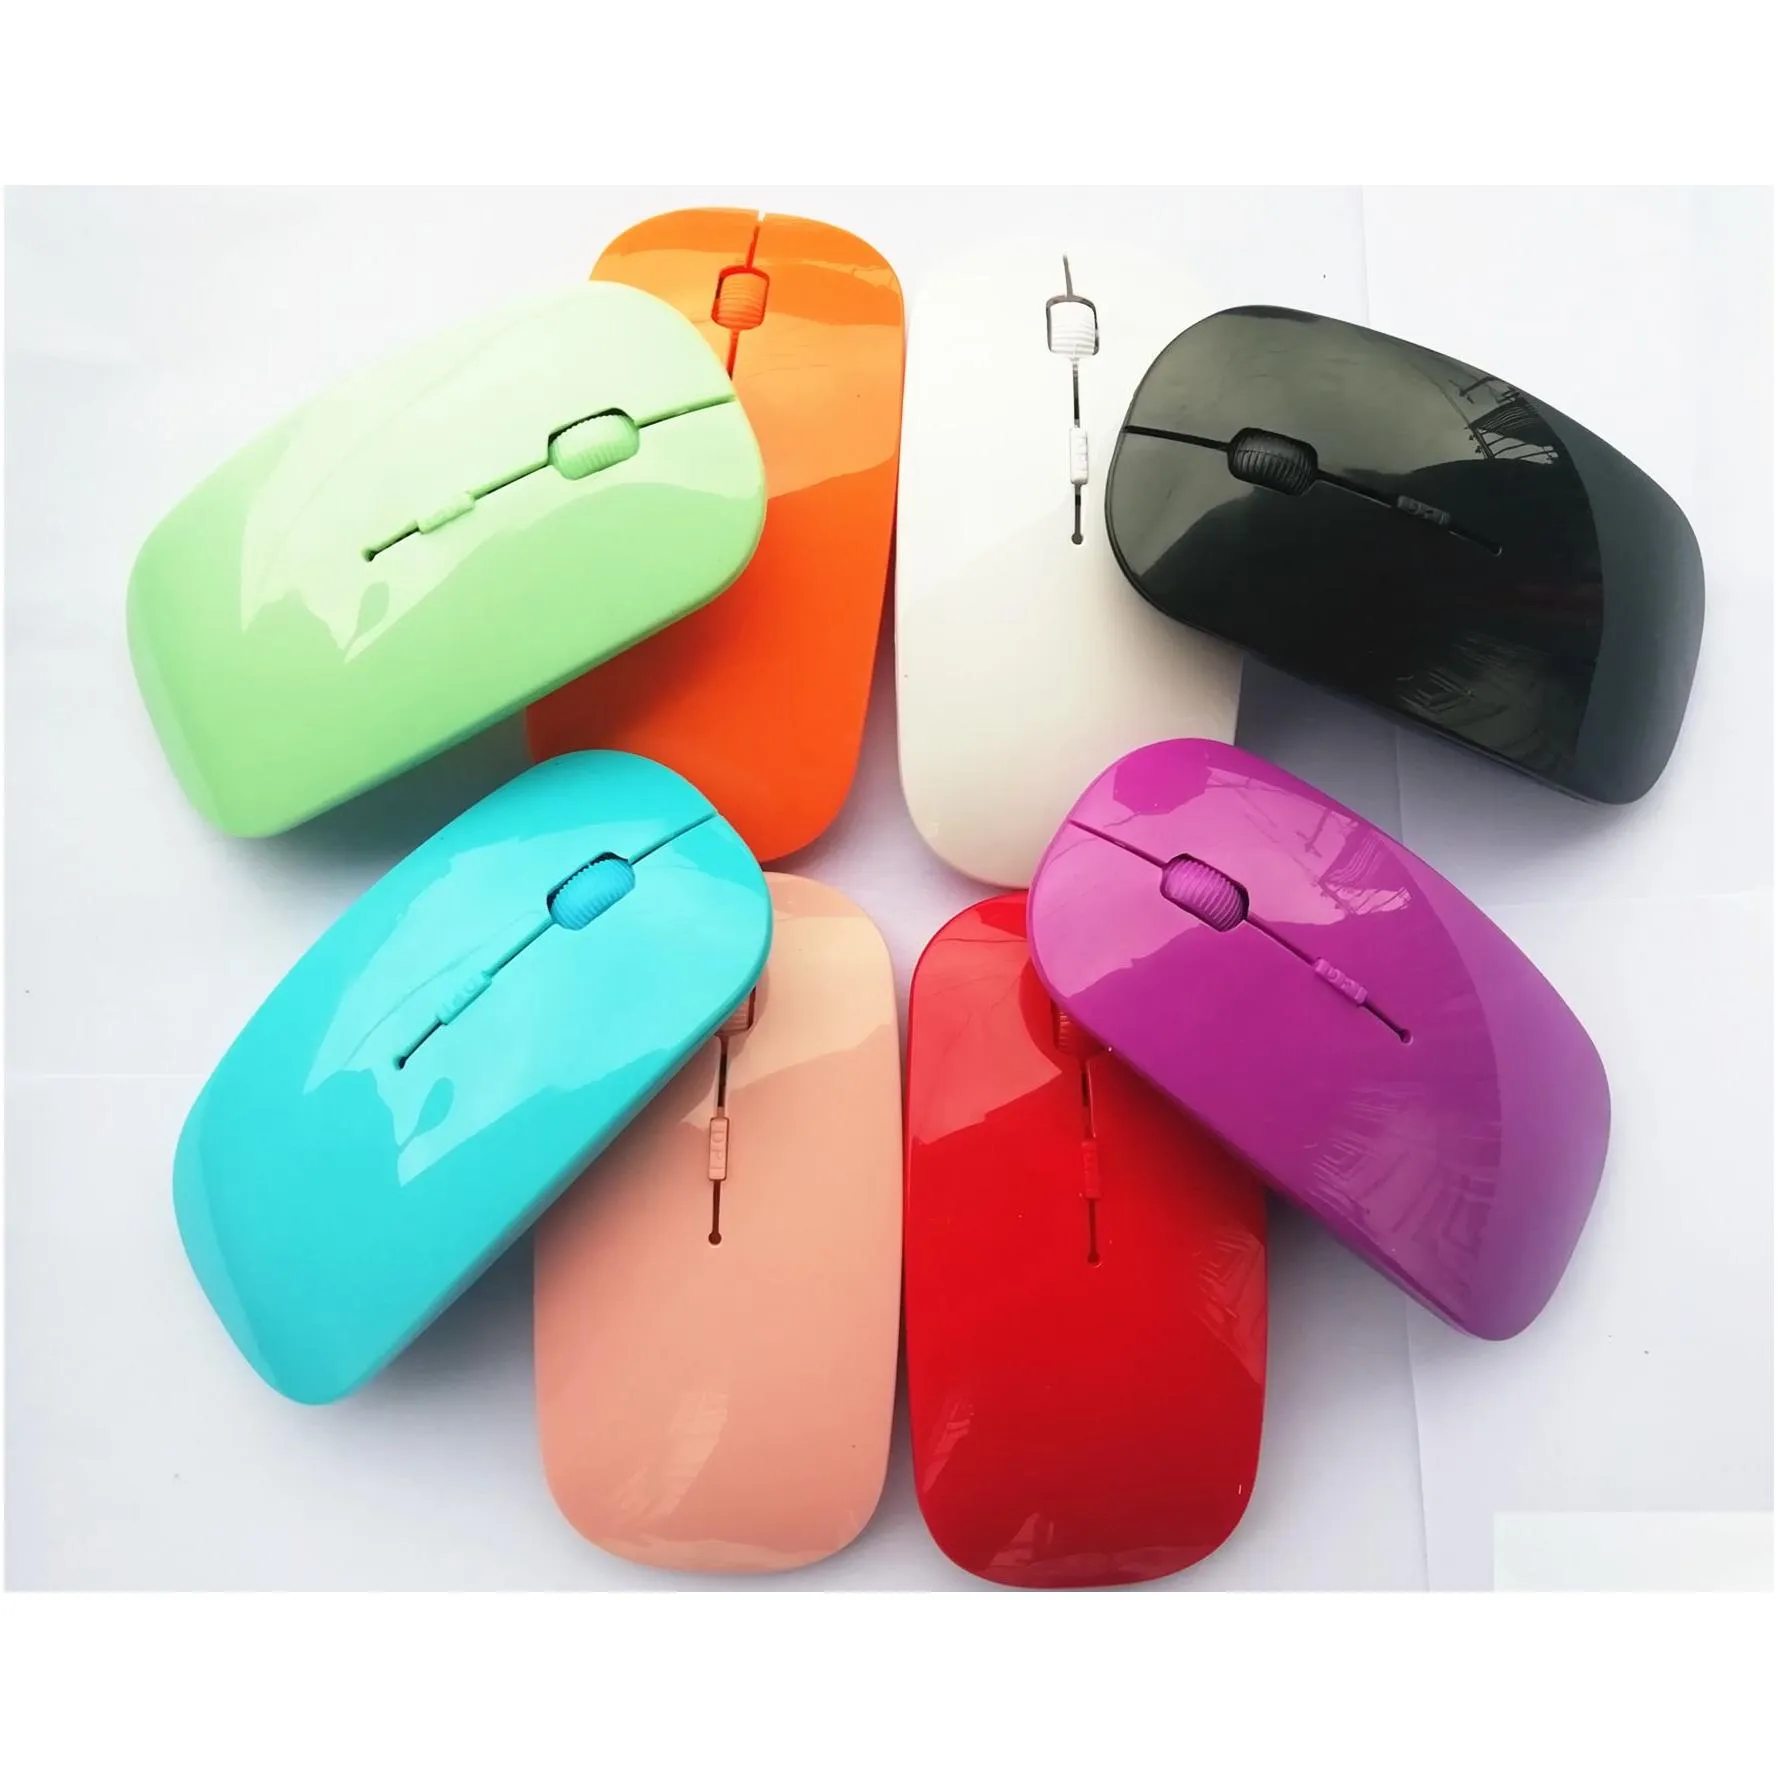 usb optical wireless computer mice 2.4g receiver super slim mouse for pc laptop with 8 colors